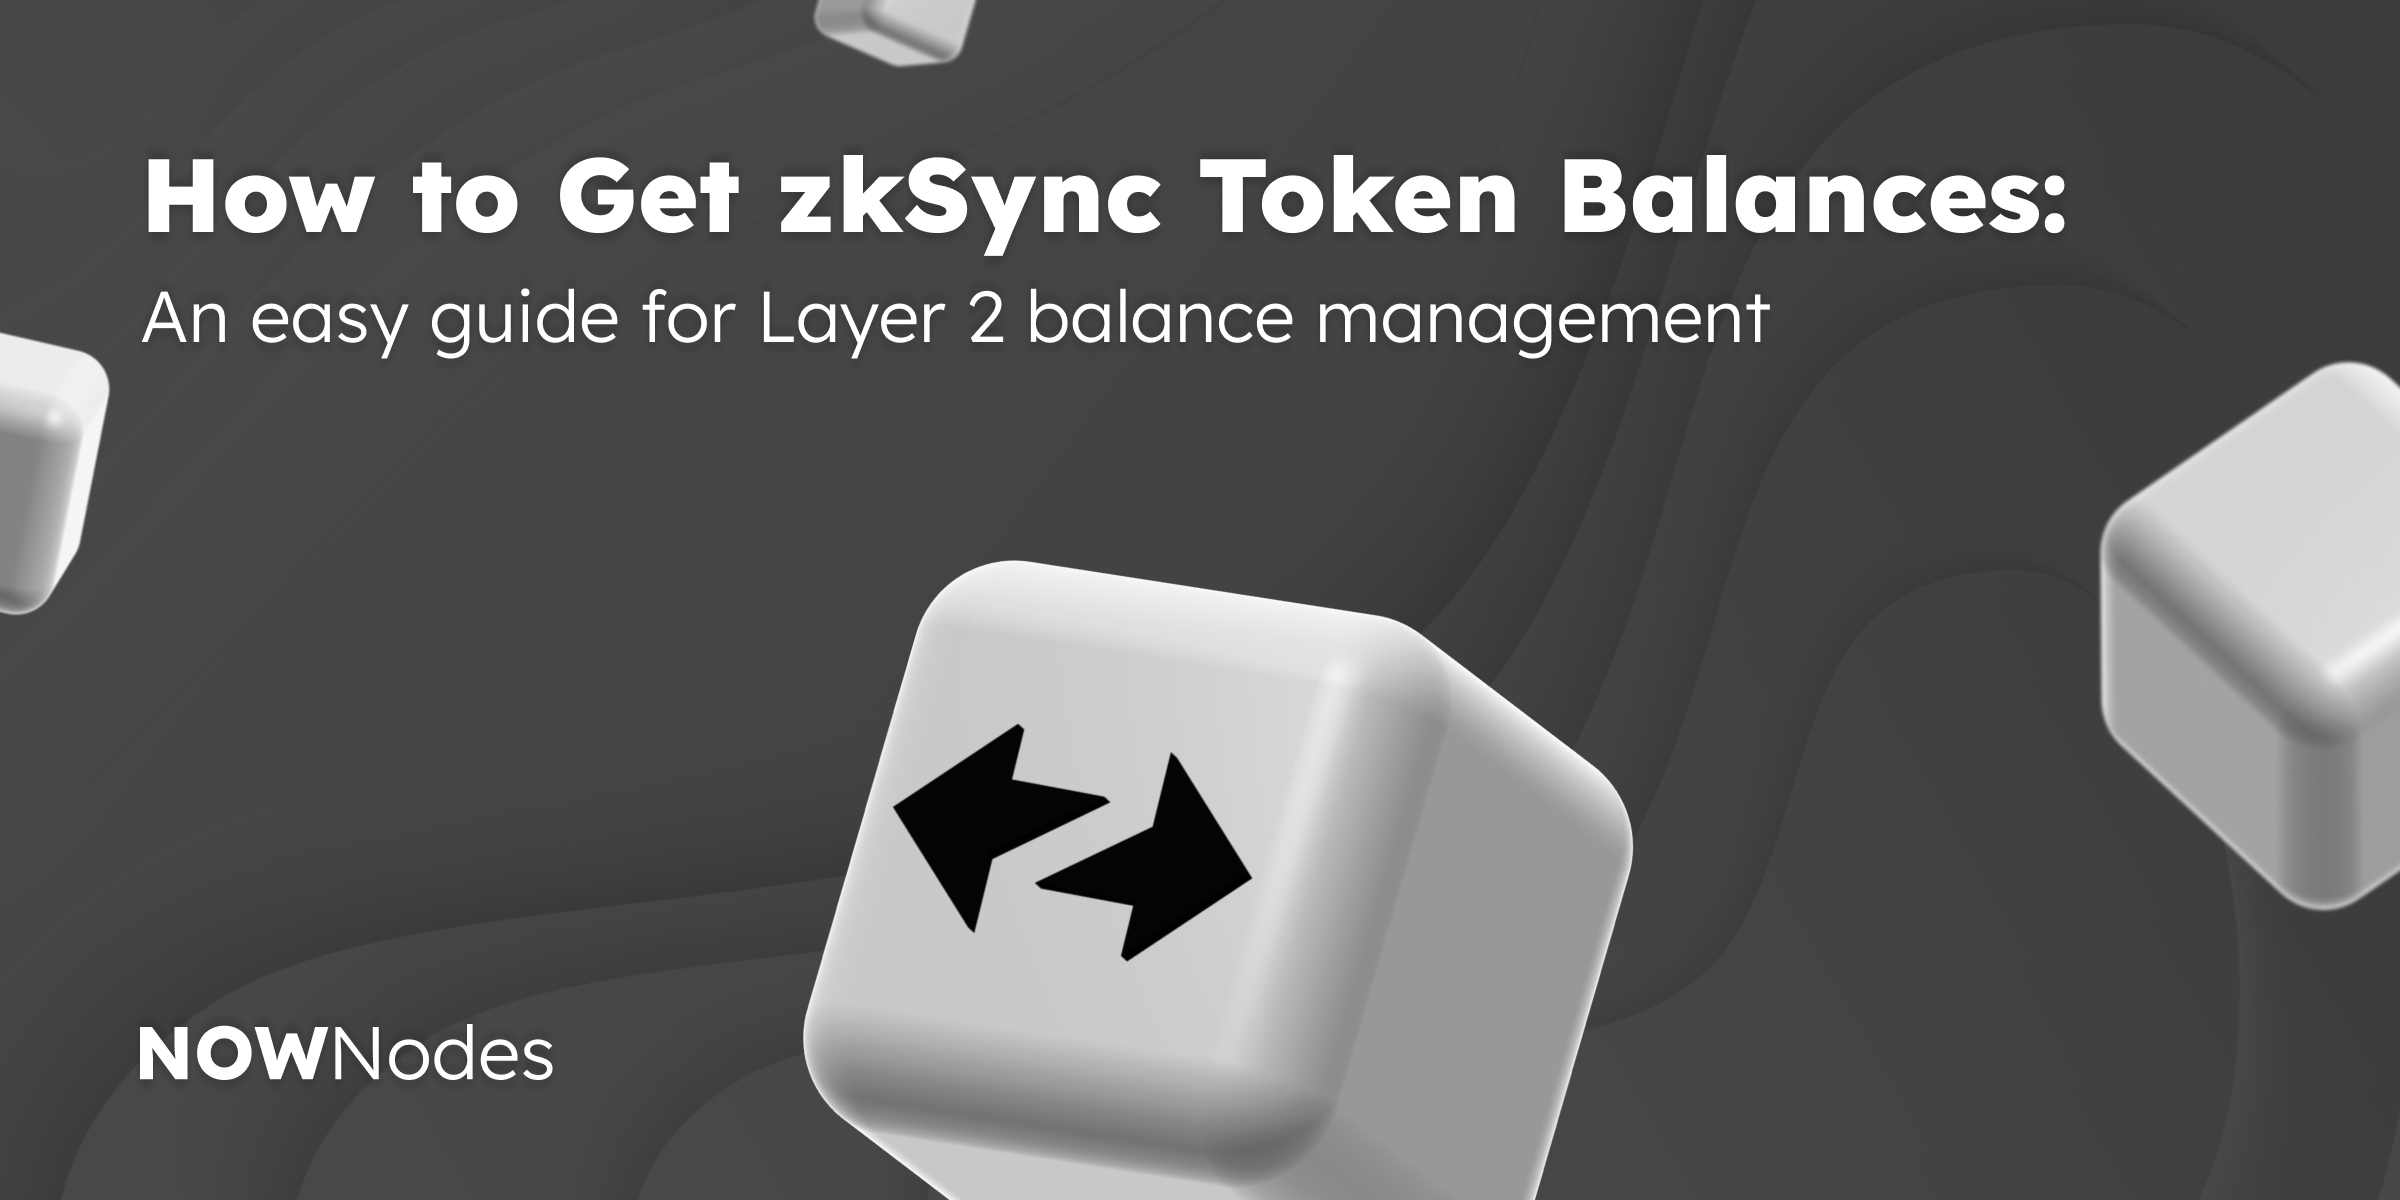 How to Get zkSync Token Balances - An easy guide for Layer 2 balance management